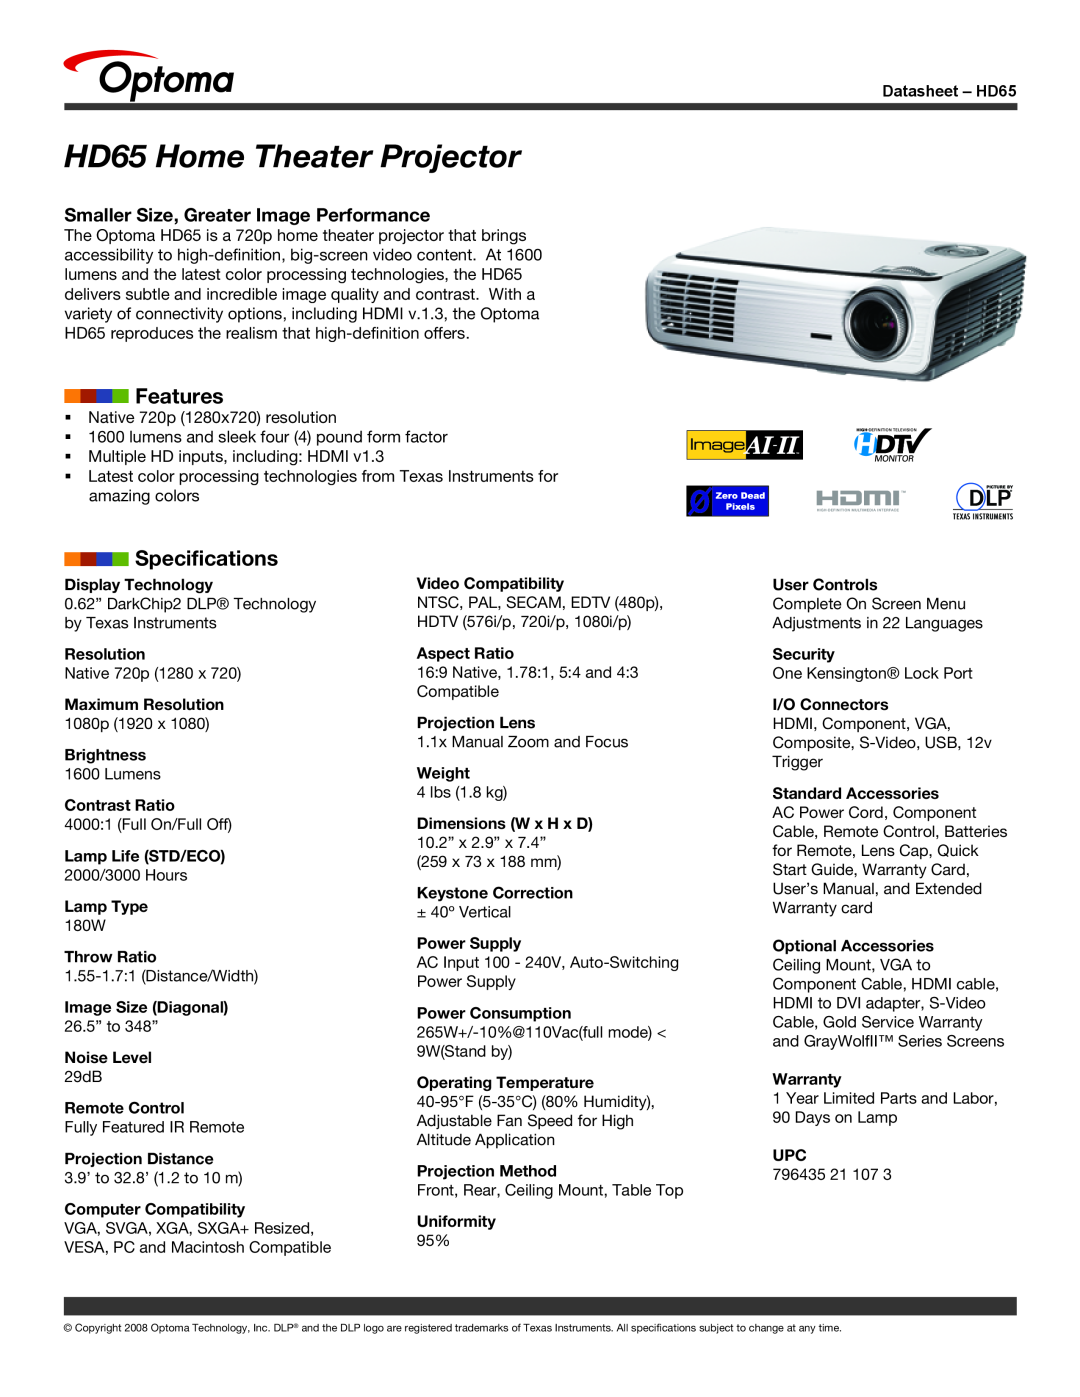 Optoma Technology specifications HD65 Home Theater Projector, Features, Specifications 